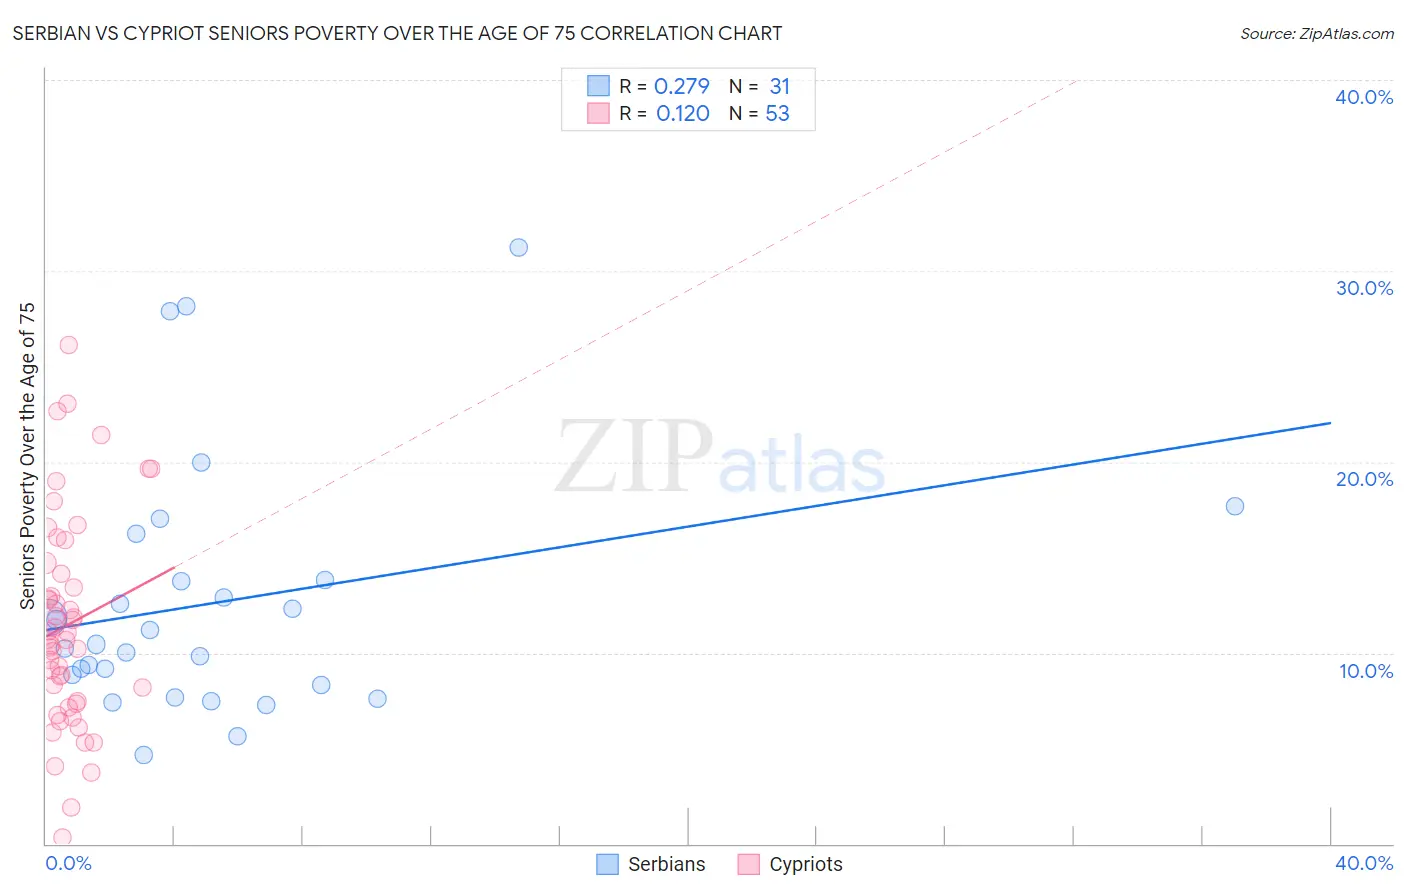 Serbian vs Cypriot Seniors Poverty Over the Age of 75